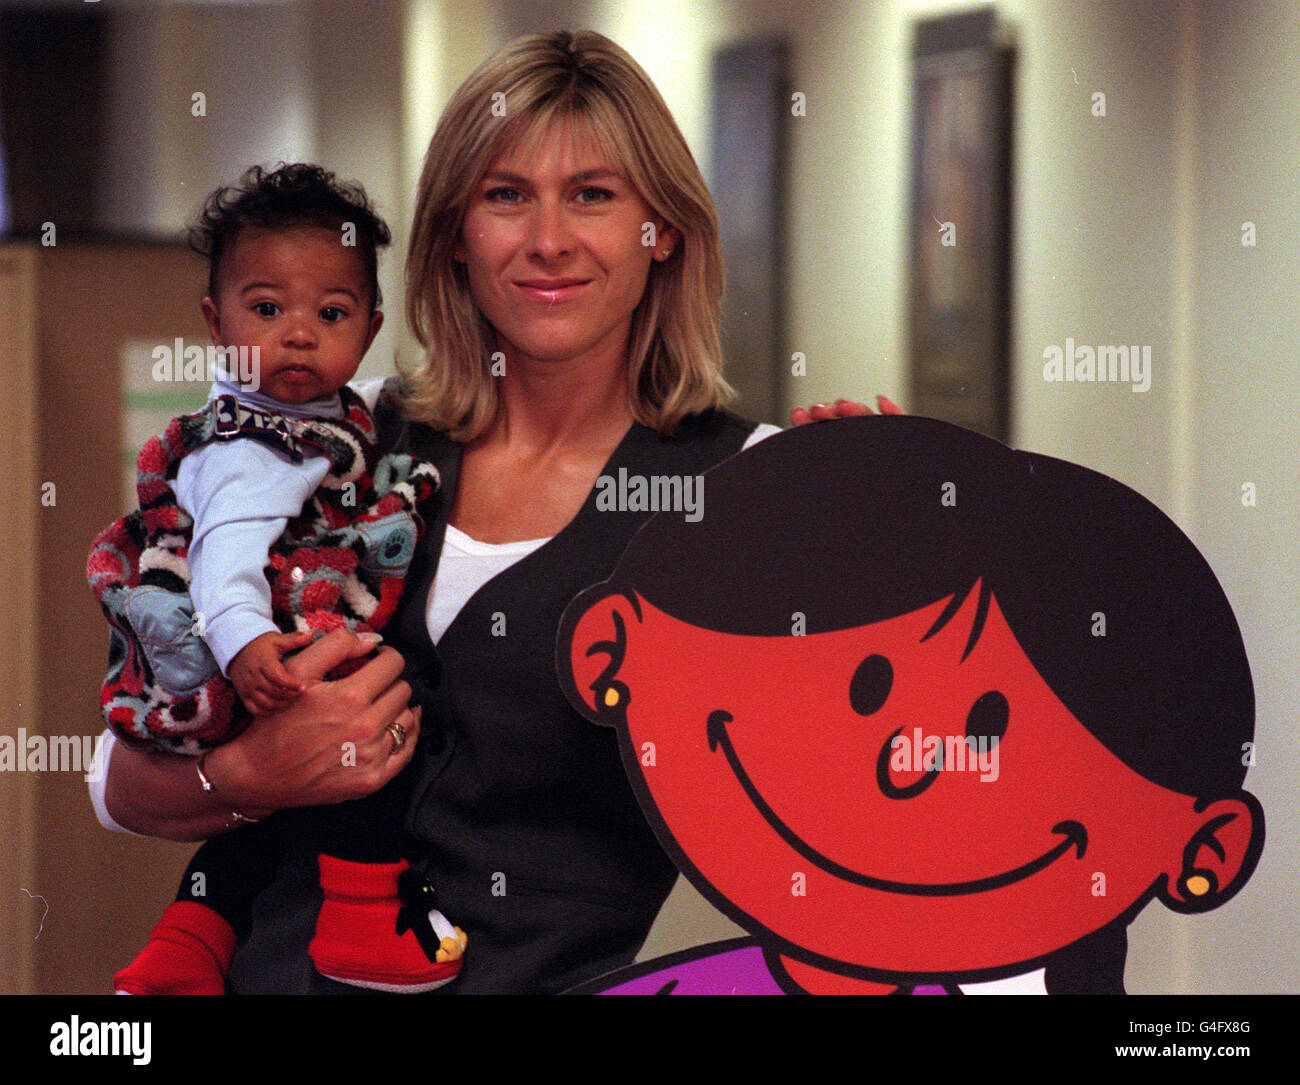 PA NEWS PHOTO 22/10/98 FORMER OLYMPIC SWIMMER SHARRON DAVIES, WITH DAUGHTER GRACE, AT THE NSPCC CENTRE IN LONDON, TO HELP LAUNCH 'THE PACK TO HELP PARENTS NOT TO SMACK'. Stock Photo